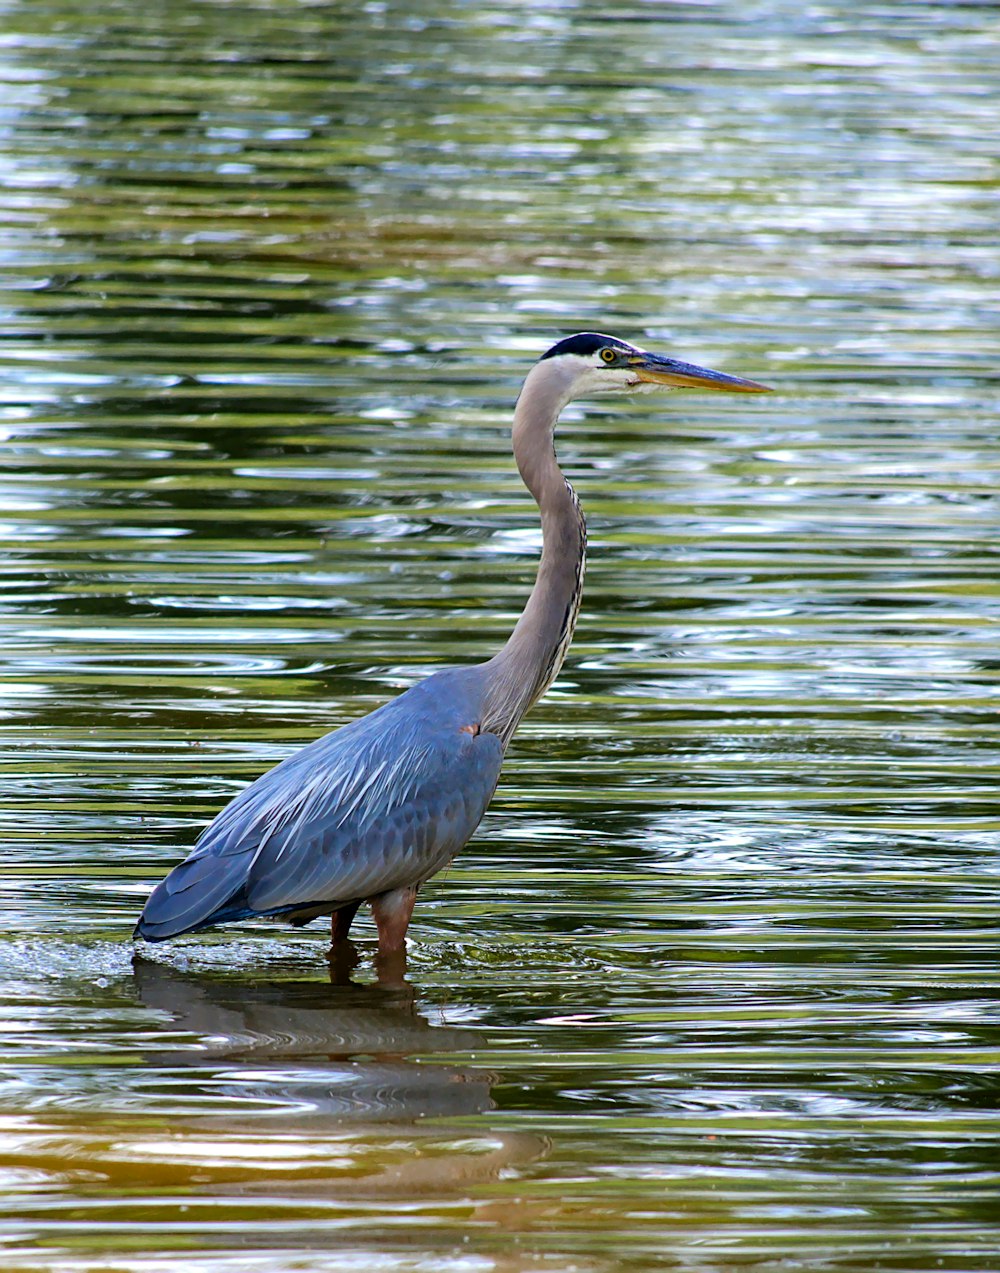 a blue heron standing in a body of water